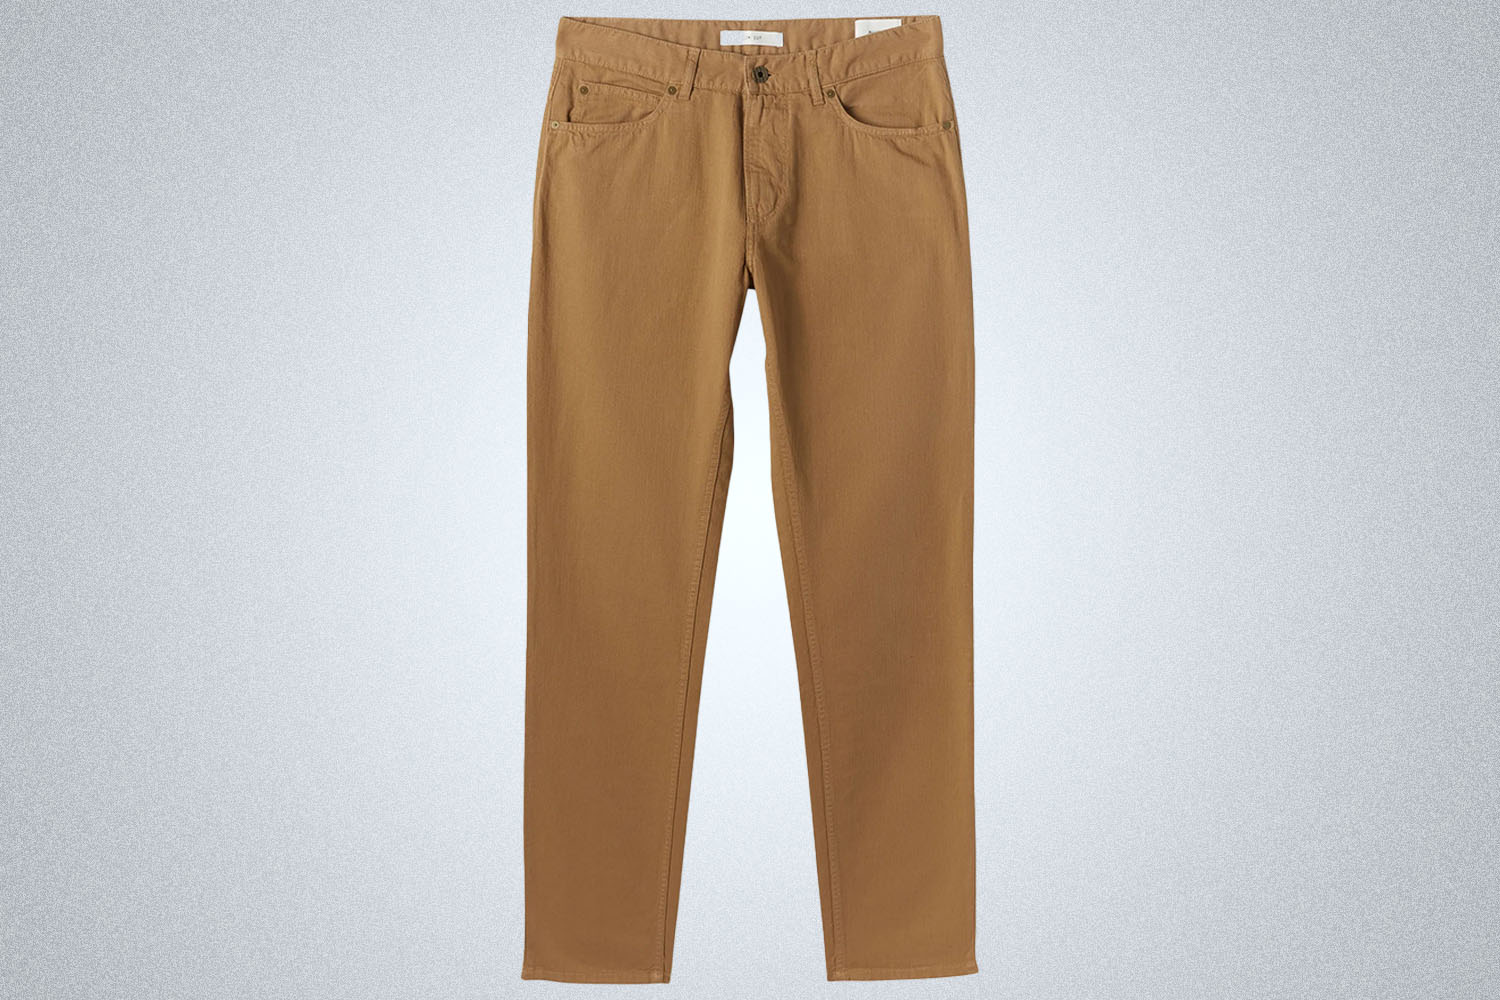 a pair of tan linen pants Billy Reid on a grey background